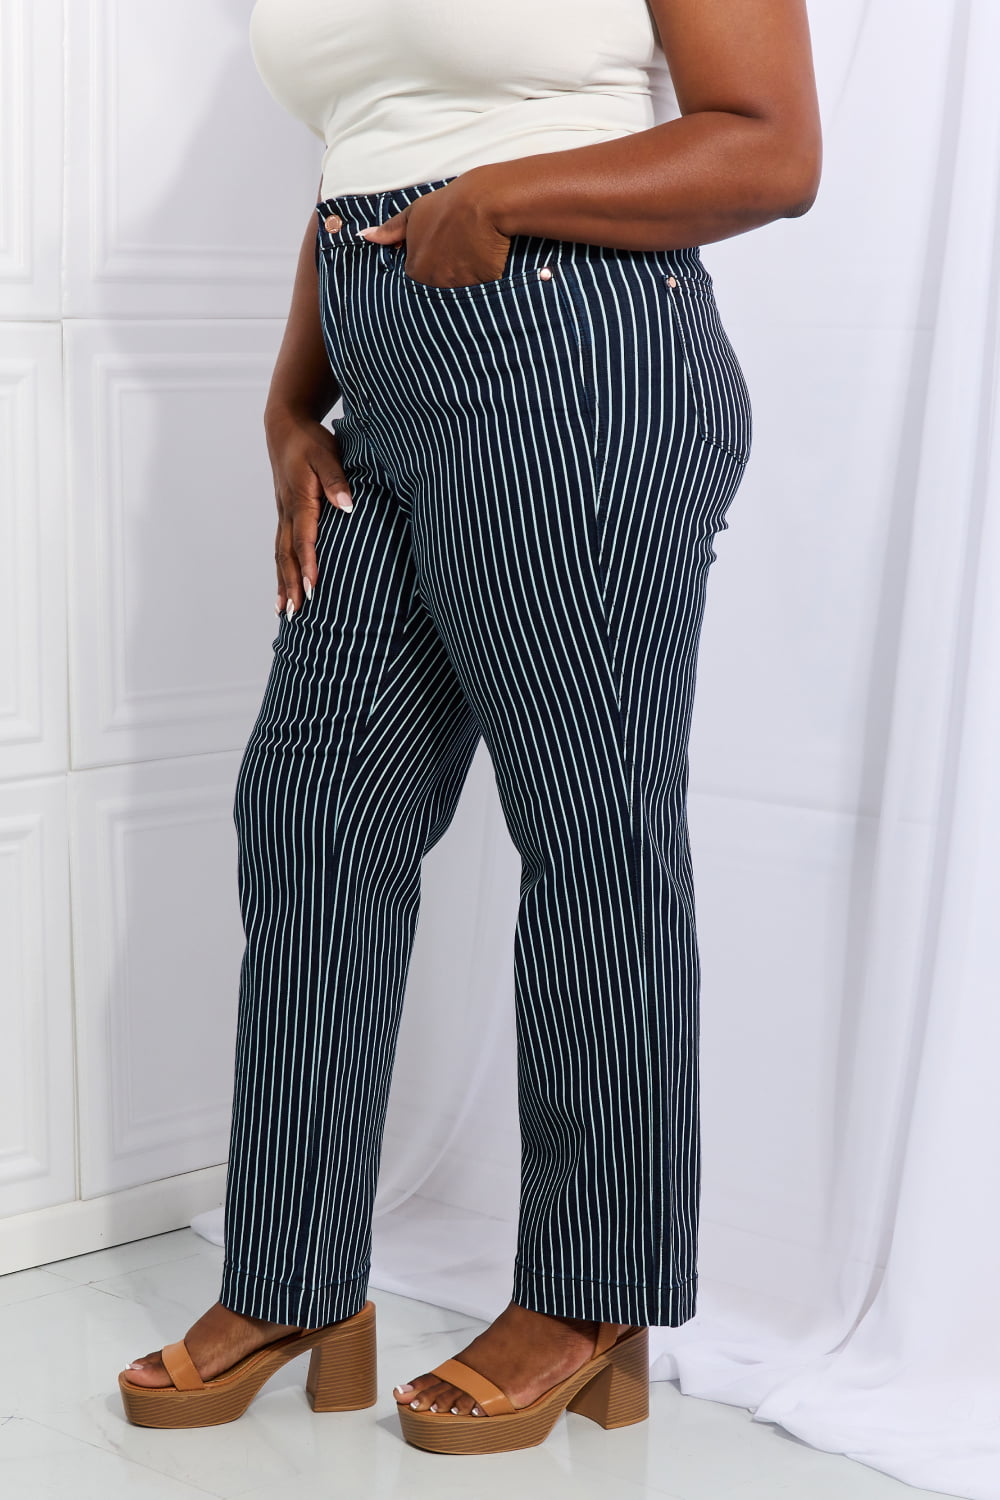 Judy Blue Cassidy Full Size High Waisted Tummy Control Striped Straight Jeans - Tigbul's Fashion